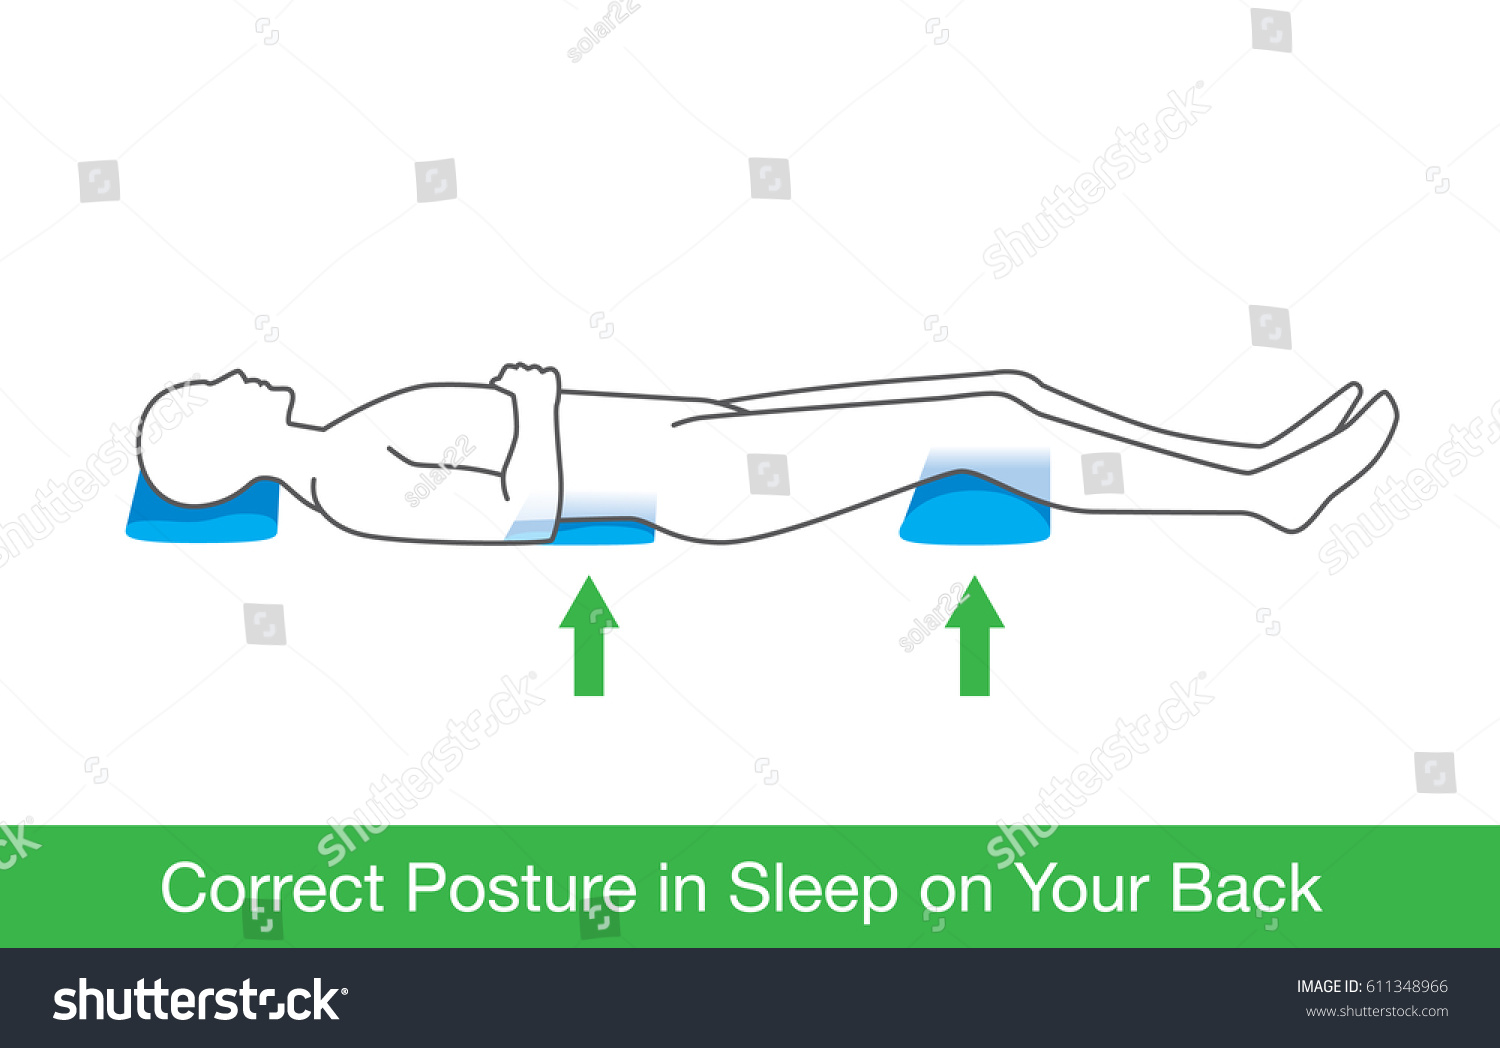 SVG of People put another pillow under the back of knees while lying down on bed. Correct sleep on back posture. svg